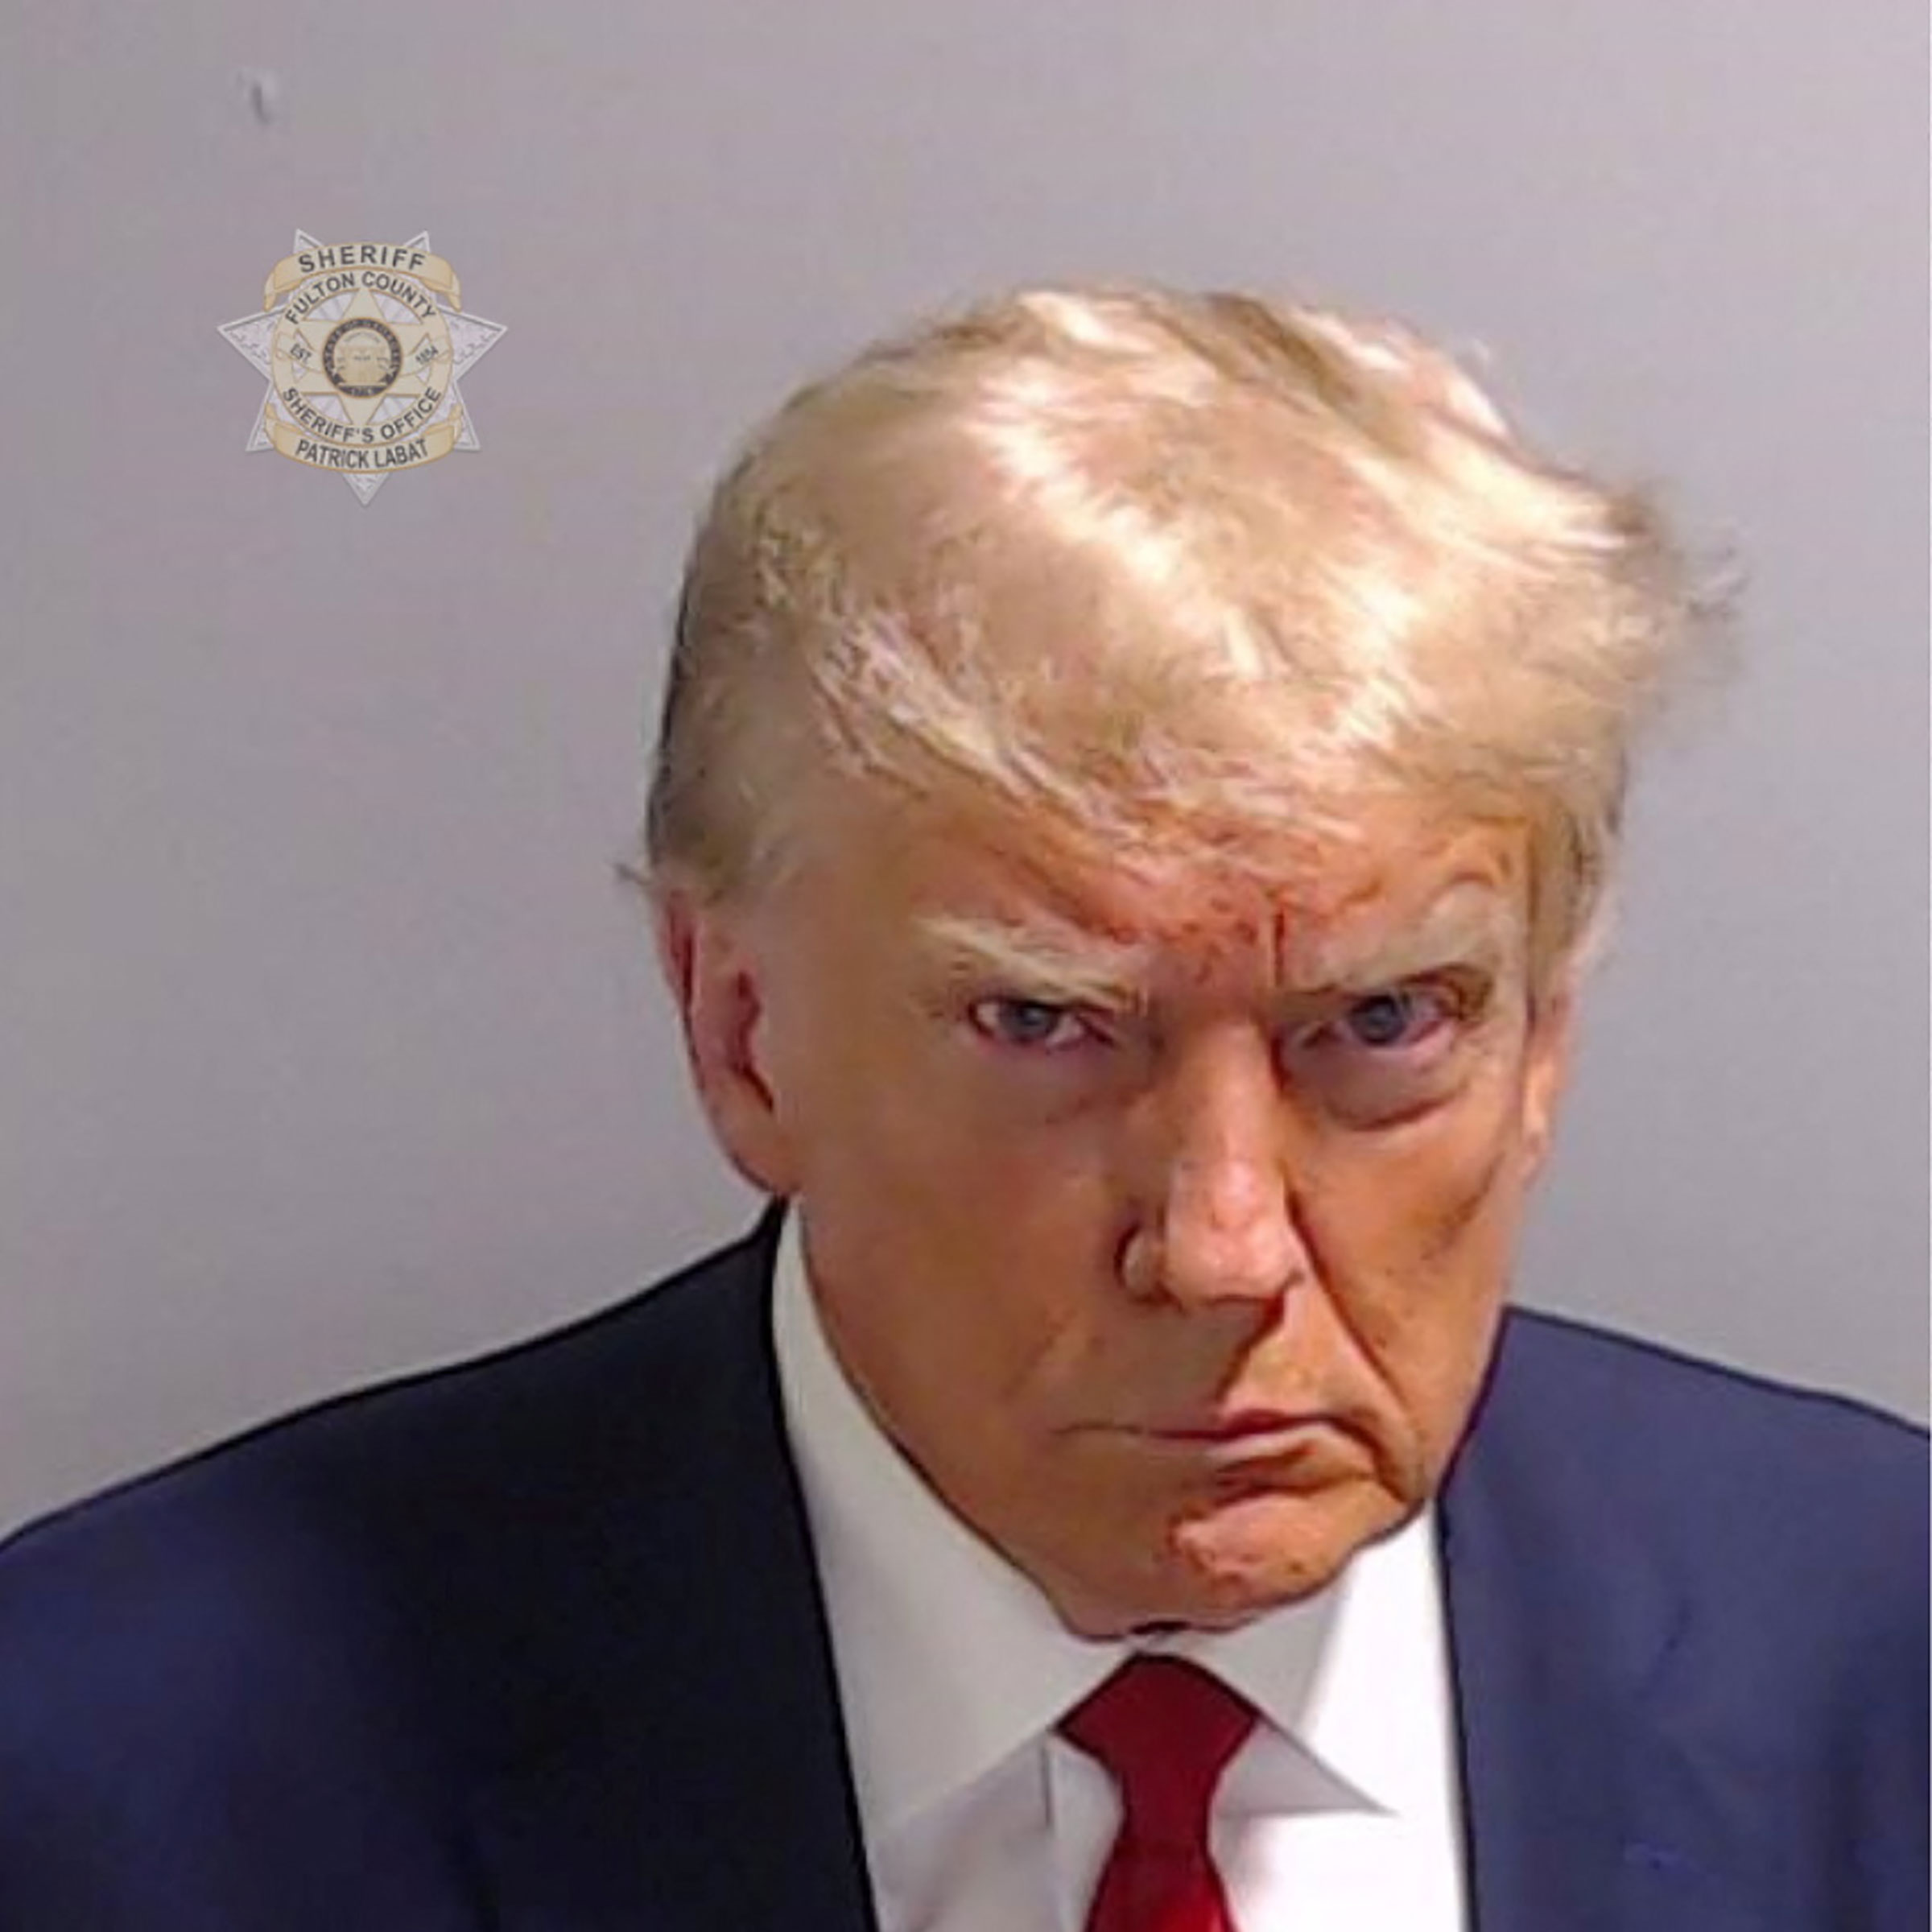 Former President Donald Trump is shown in a police booking mugshot released by the Fulton County Sheriff's Office. (Fulton County Sheriff's Office/Reuters)